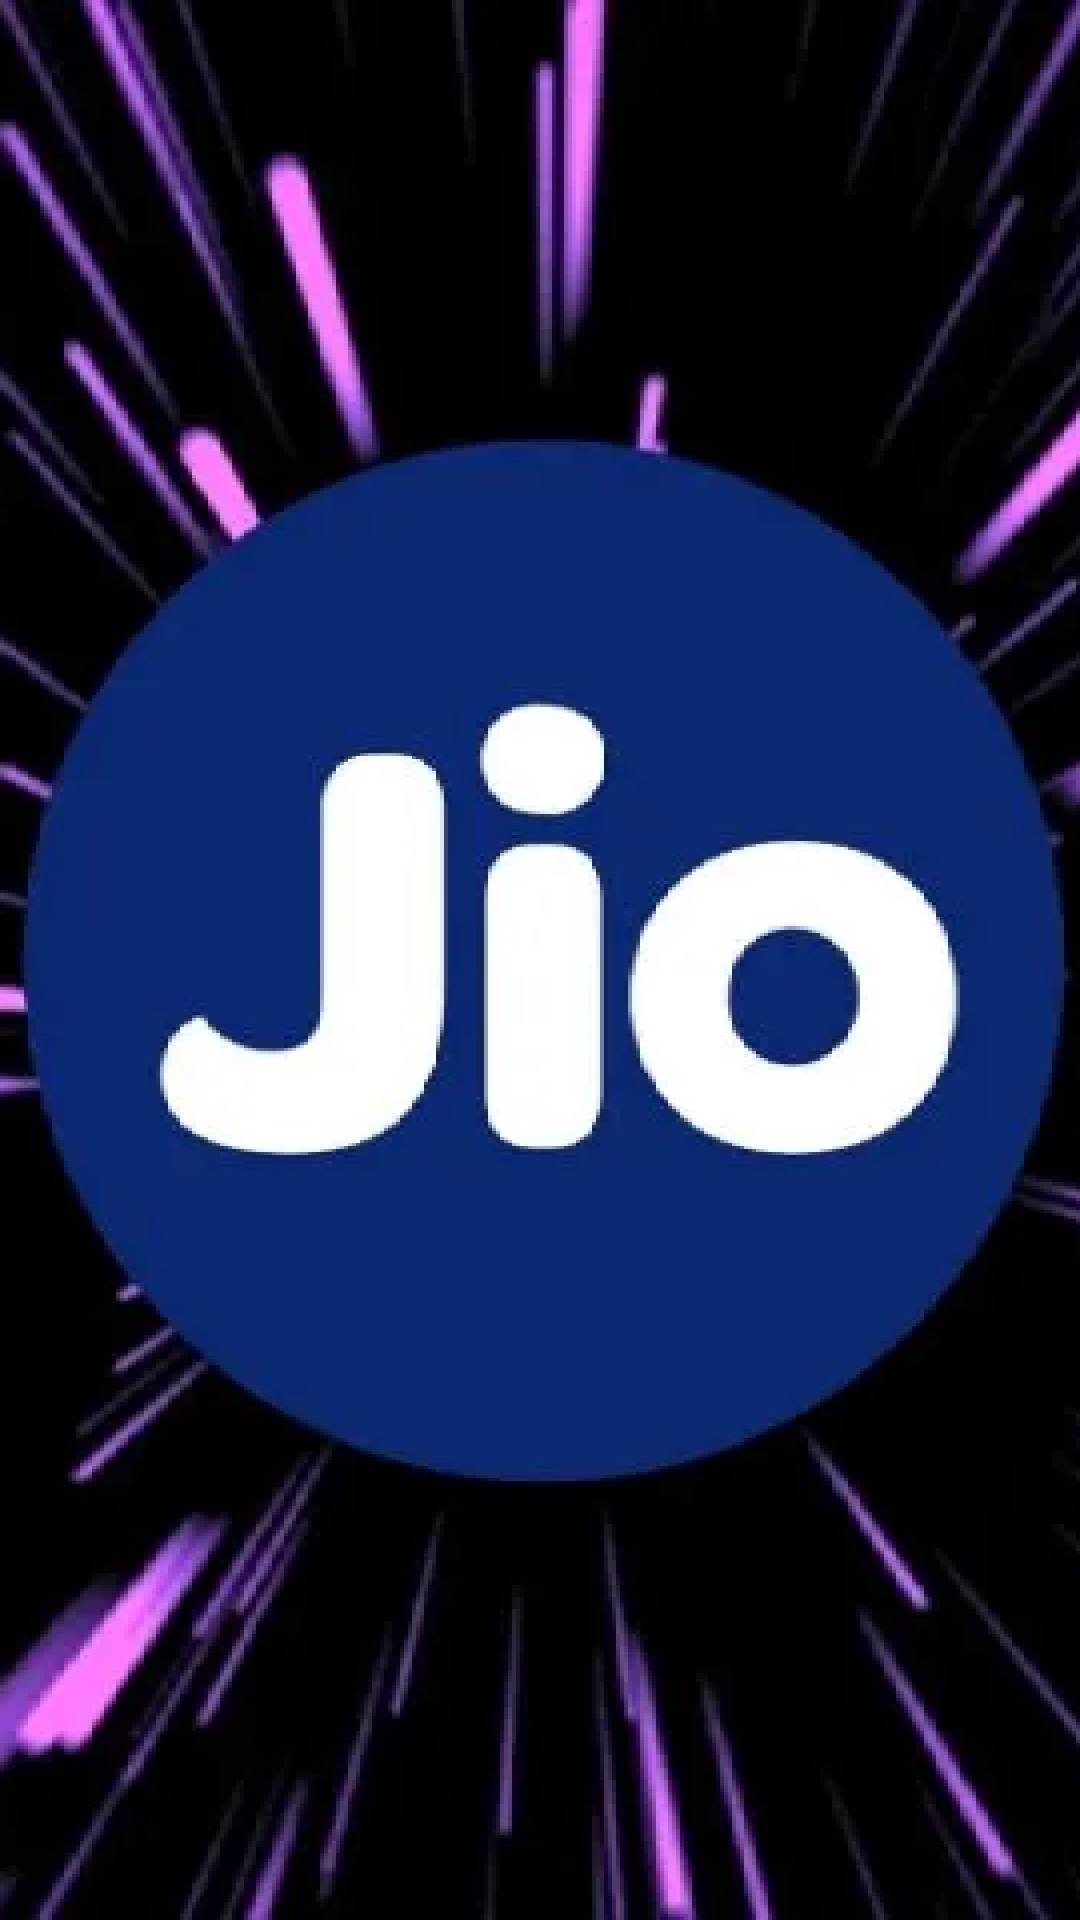 Jio launches new Rs 749 prepaid recharge plan: Check details